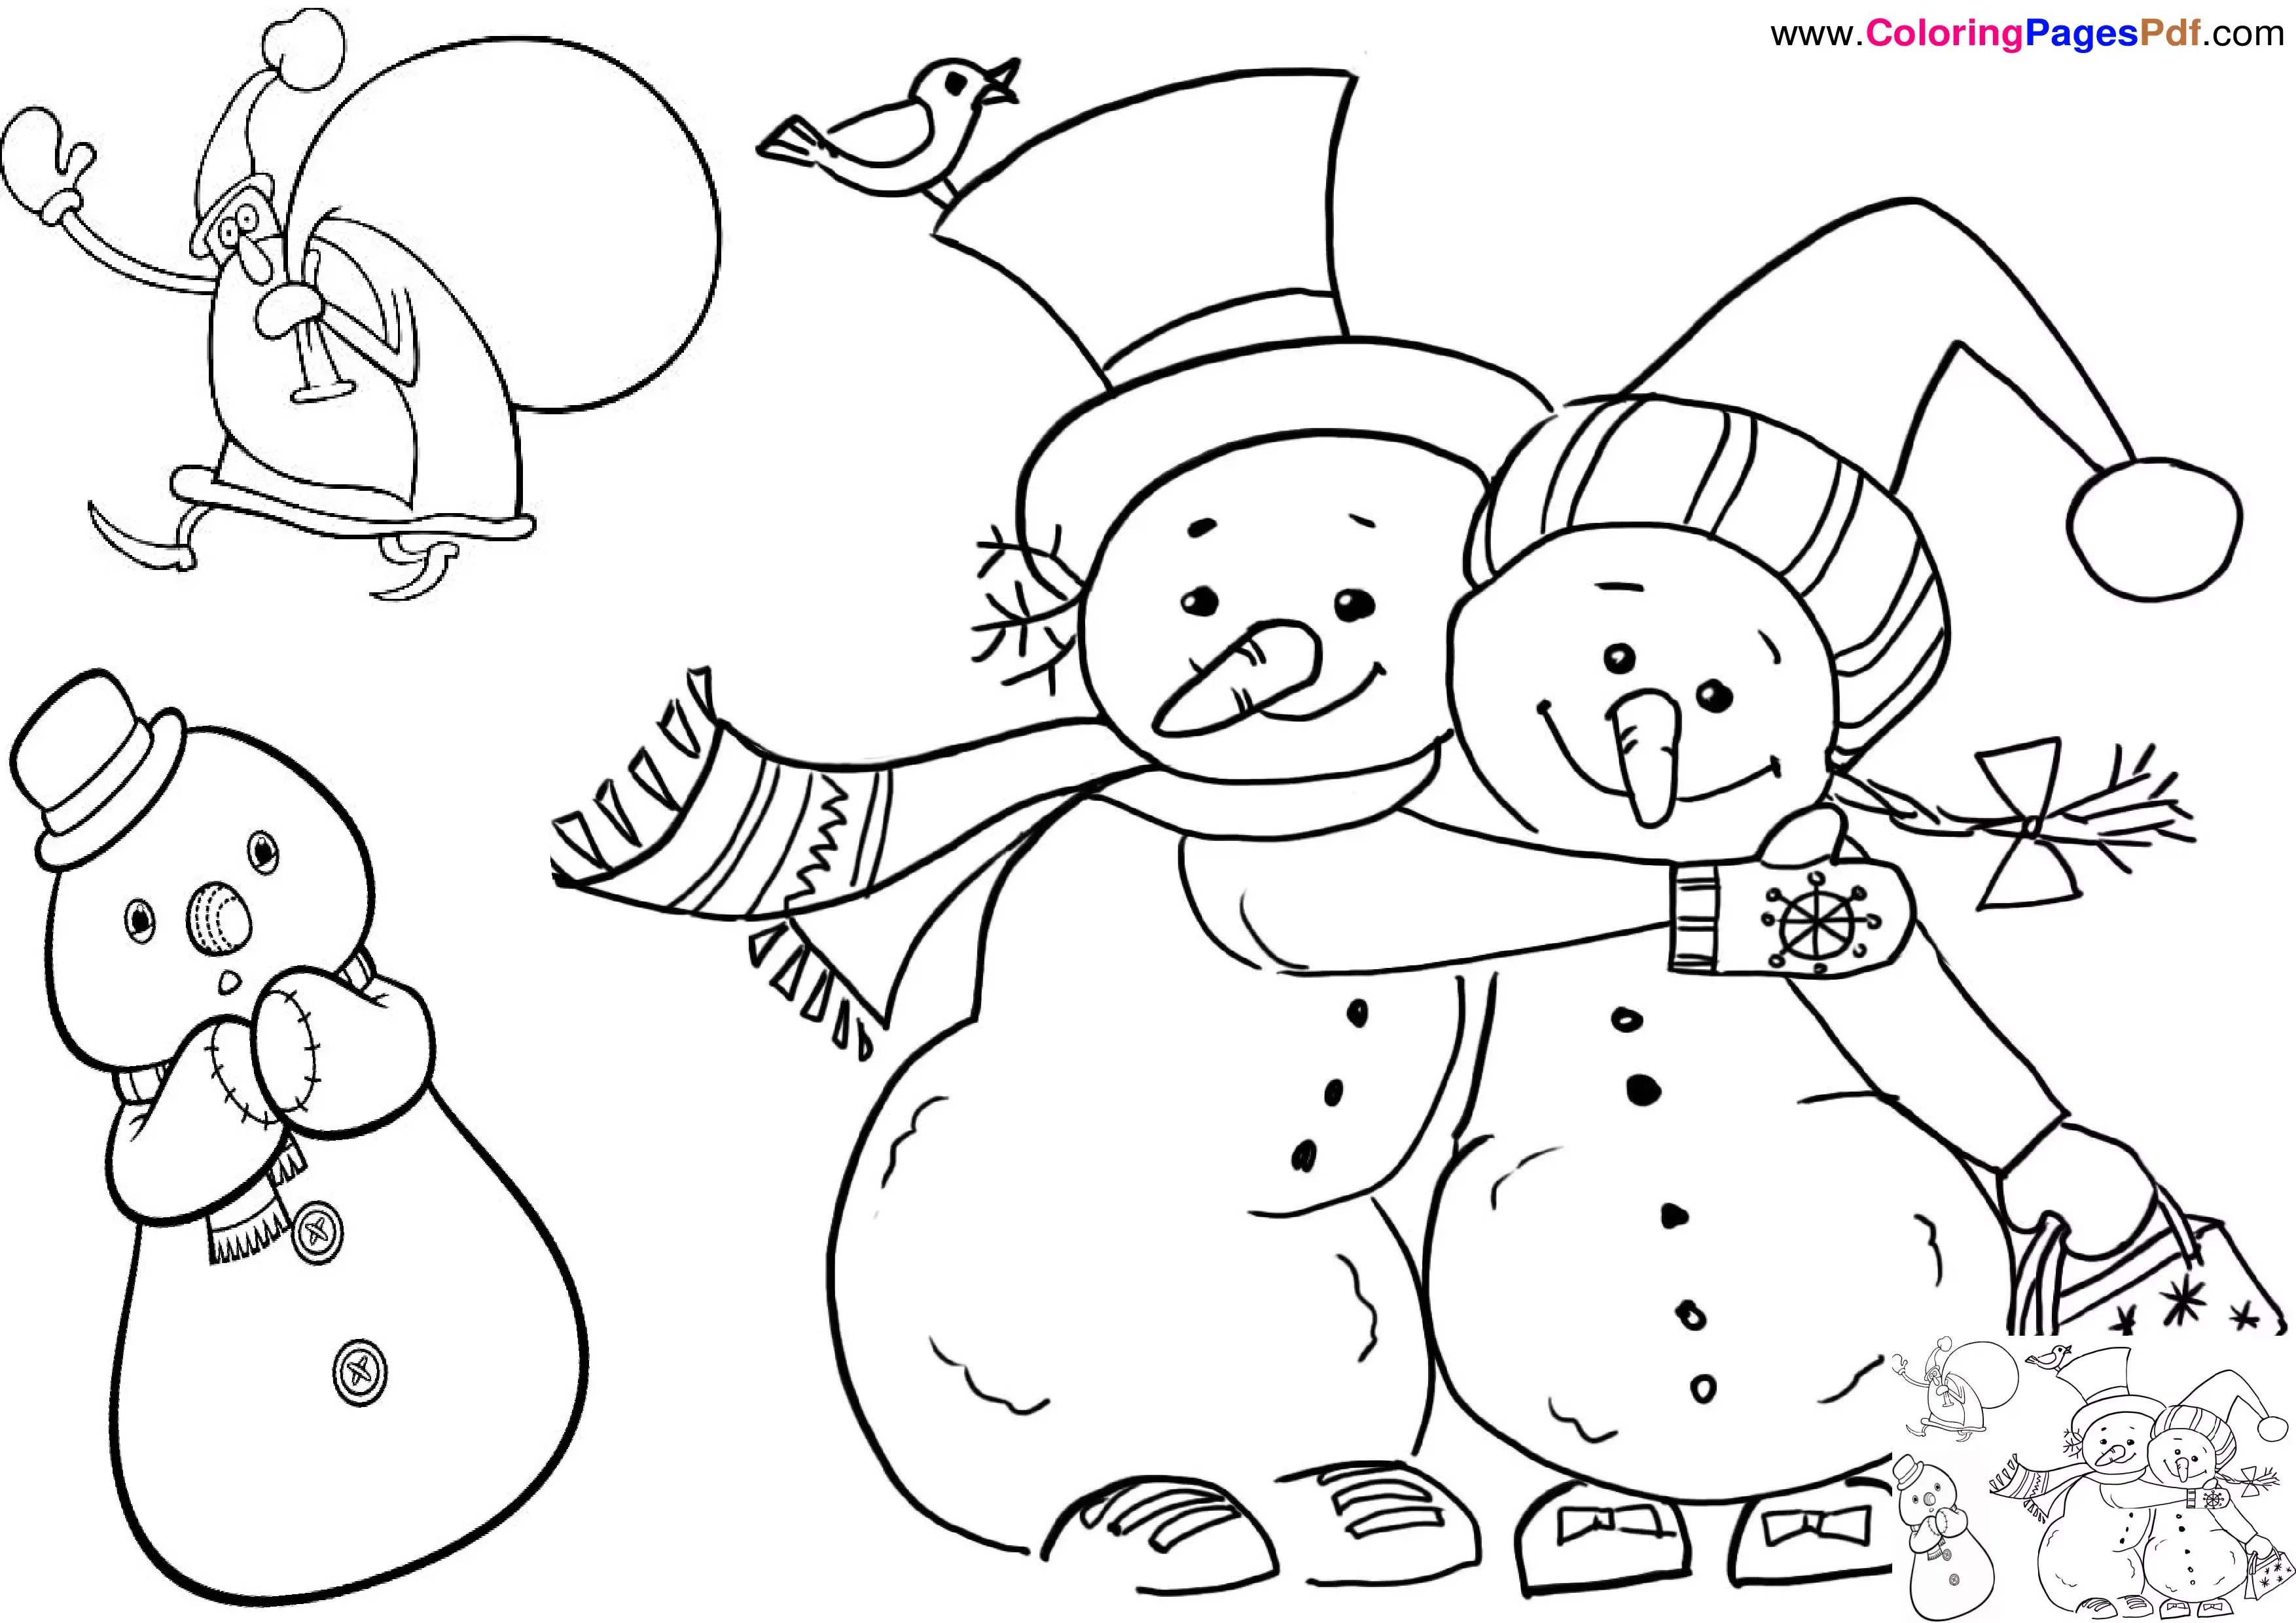 Cute snowman coloring pages